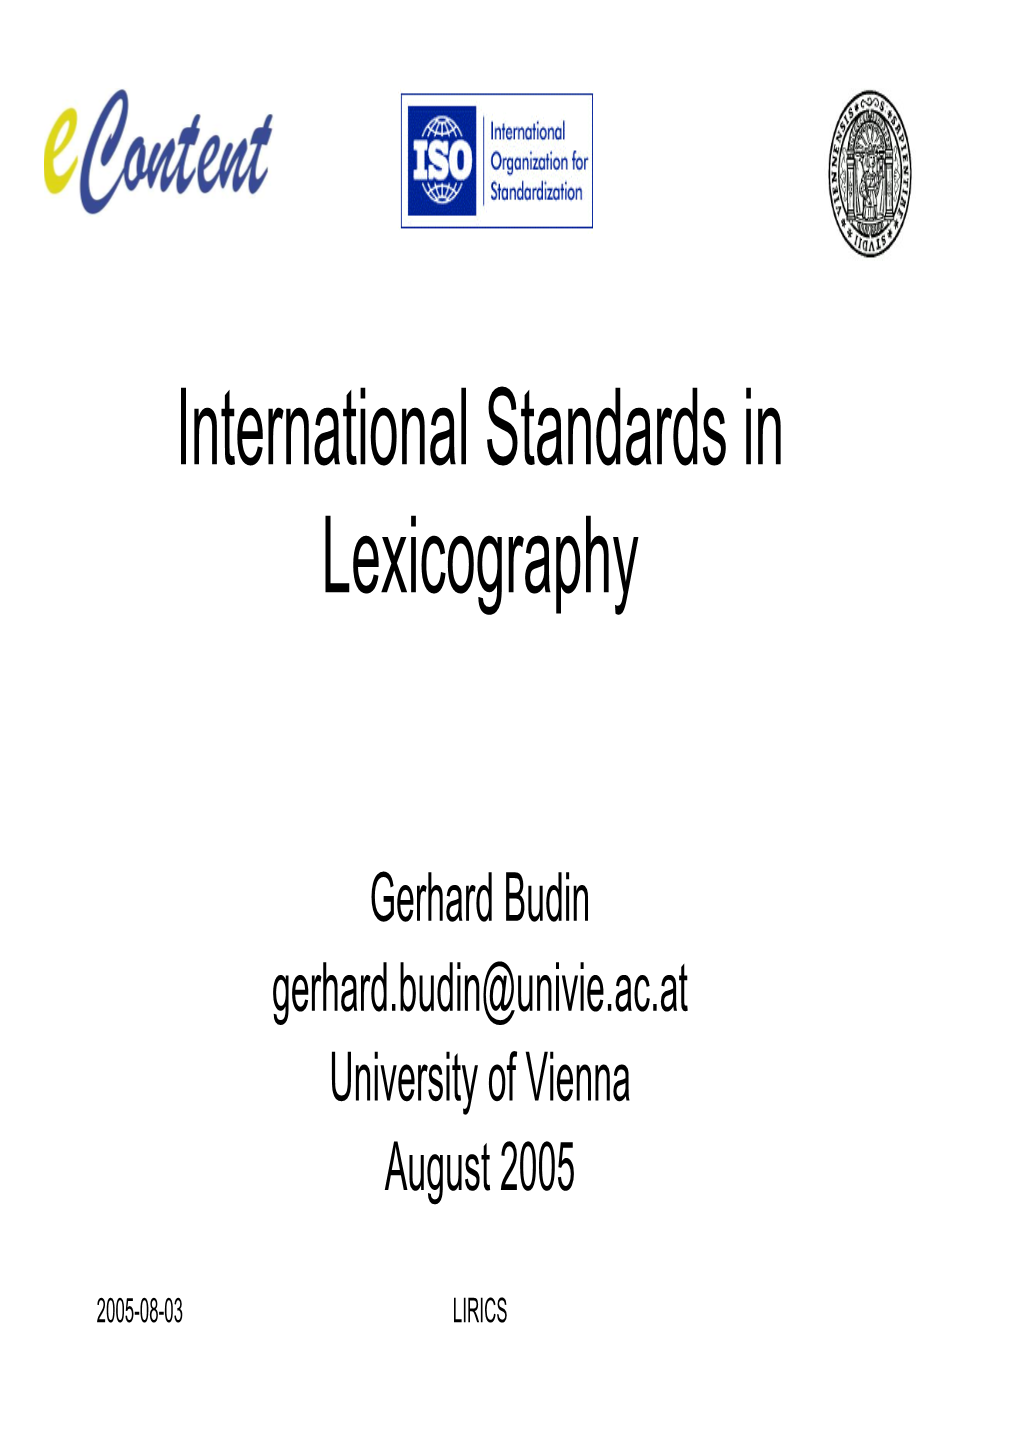 International Standards in Lexicography (Pdf)